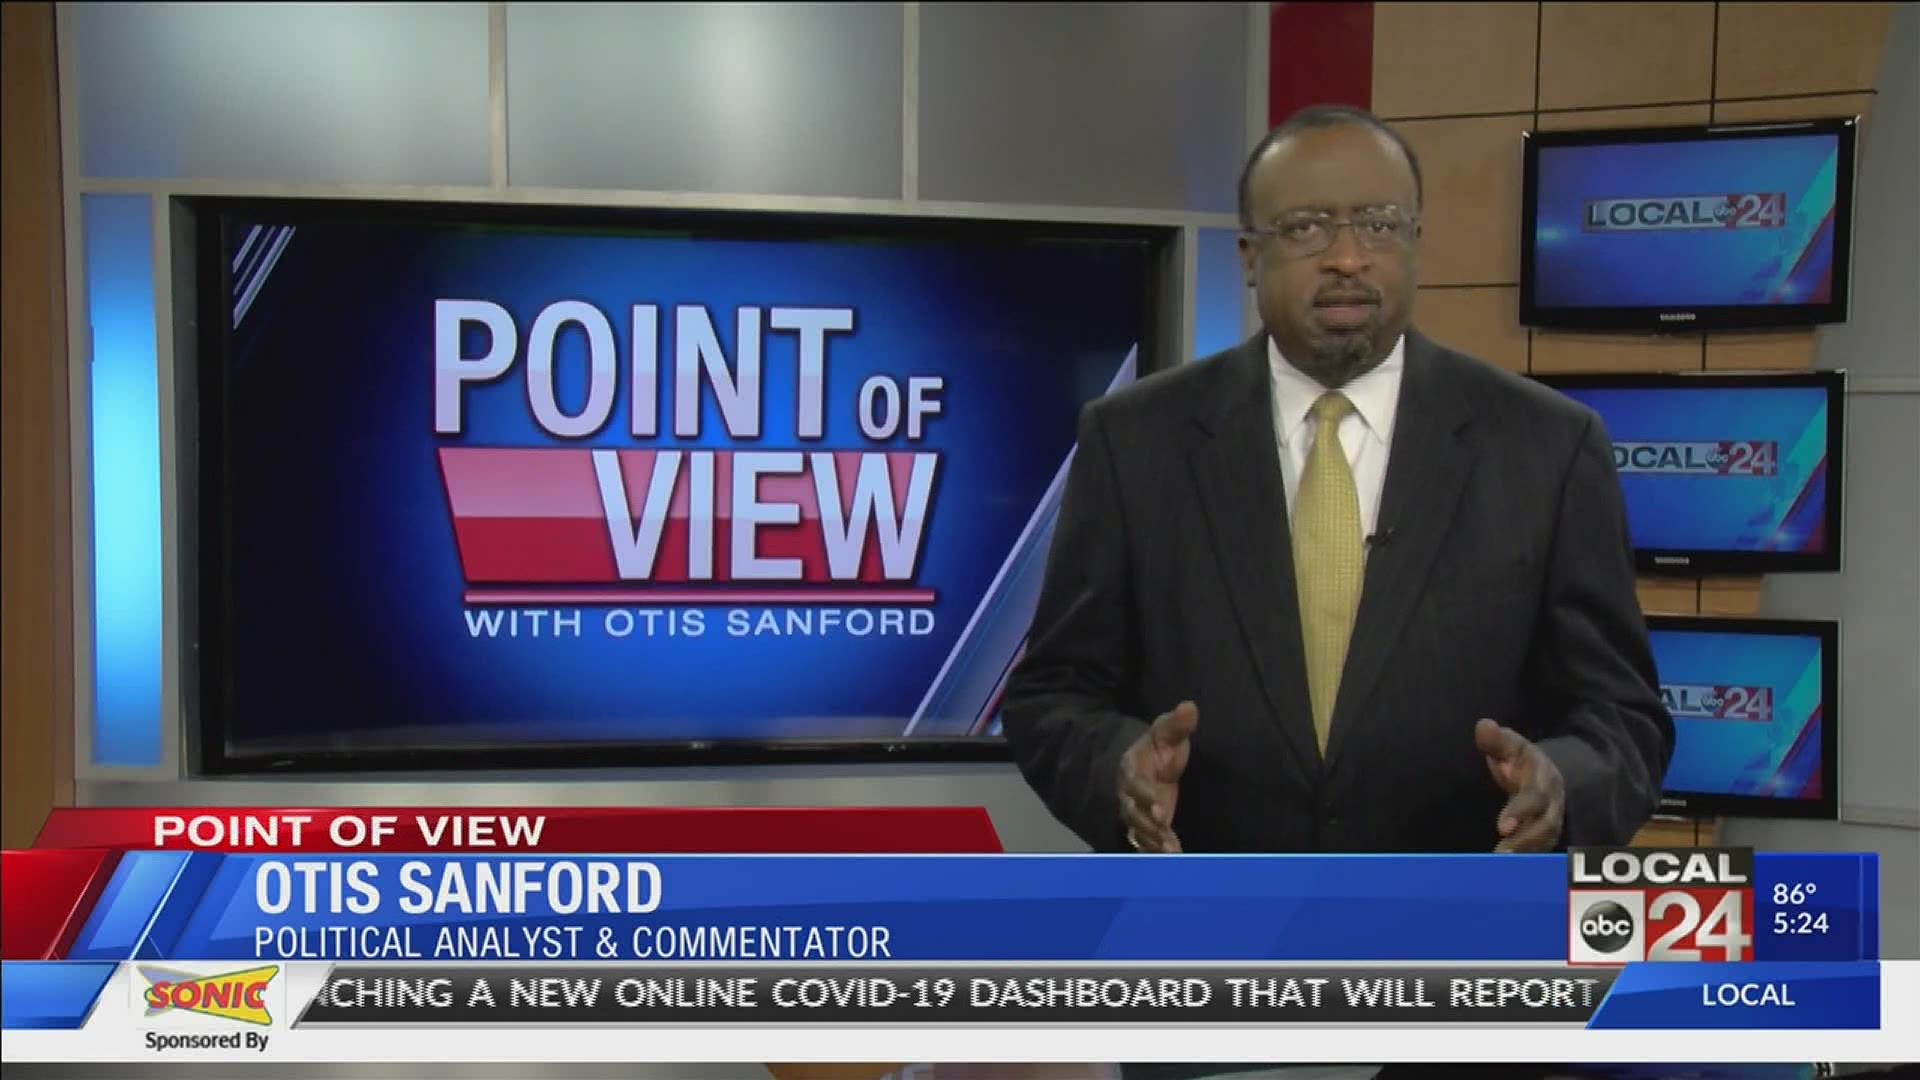 Local 24 News political analyst and commentator Otis Sanford shares his point of view on changing the Mississippi State Flag.